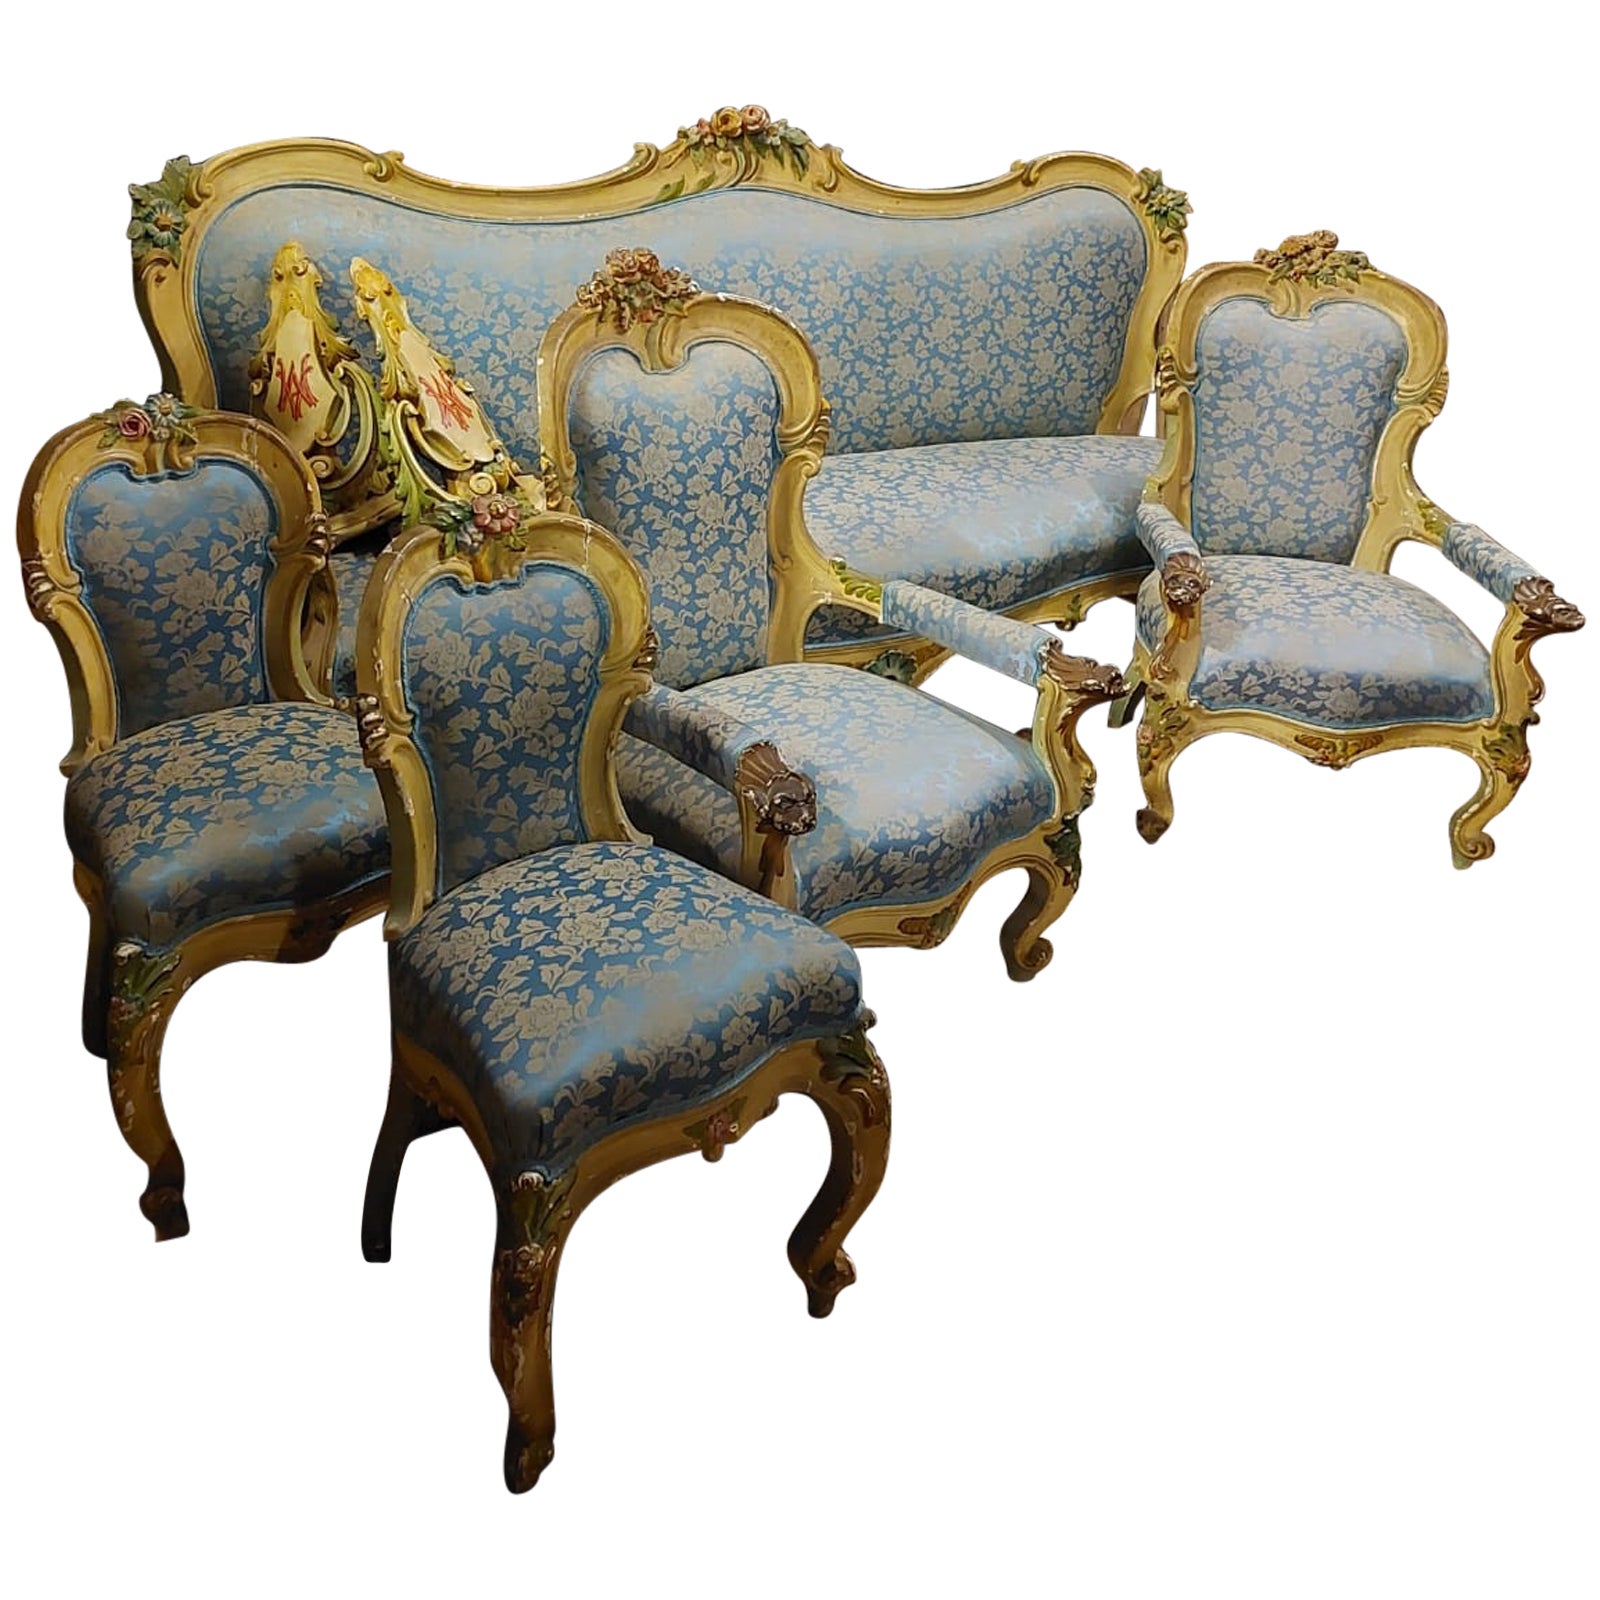 Complete Liberty living room set, carved lacquered yellow and blue, Italy